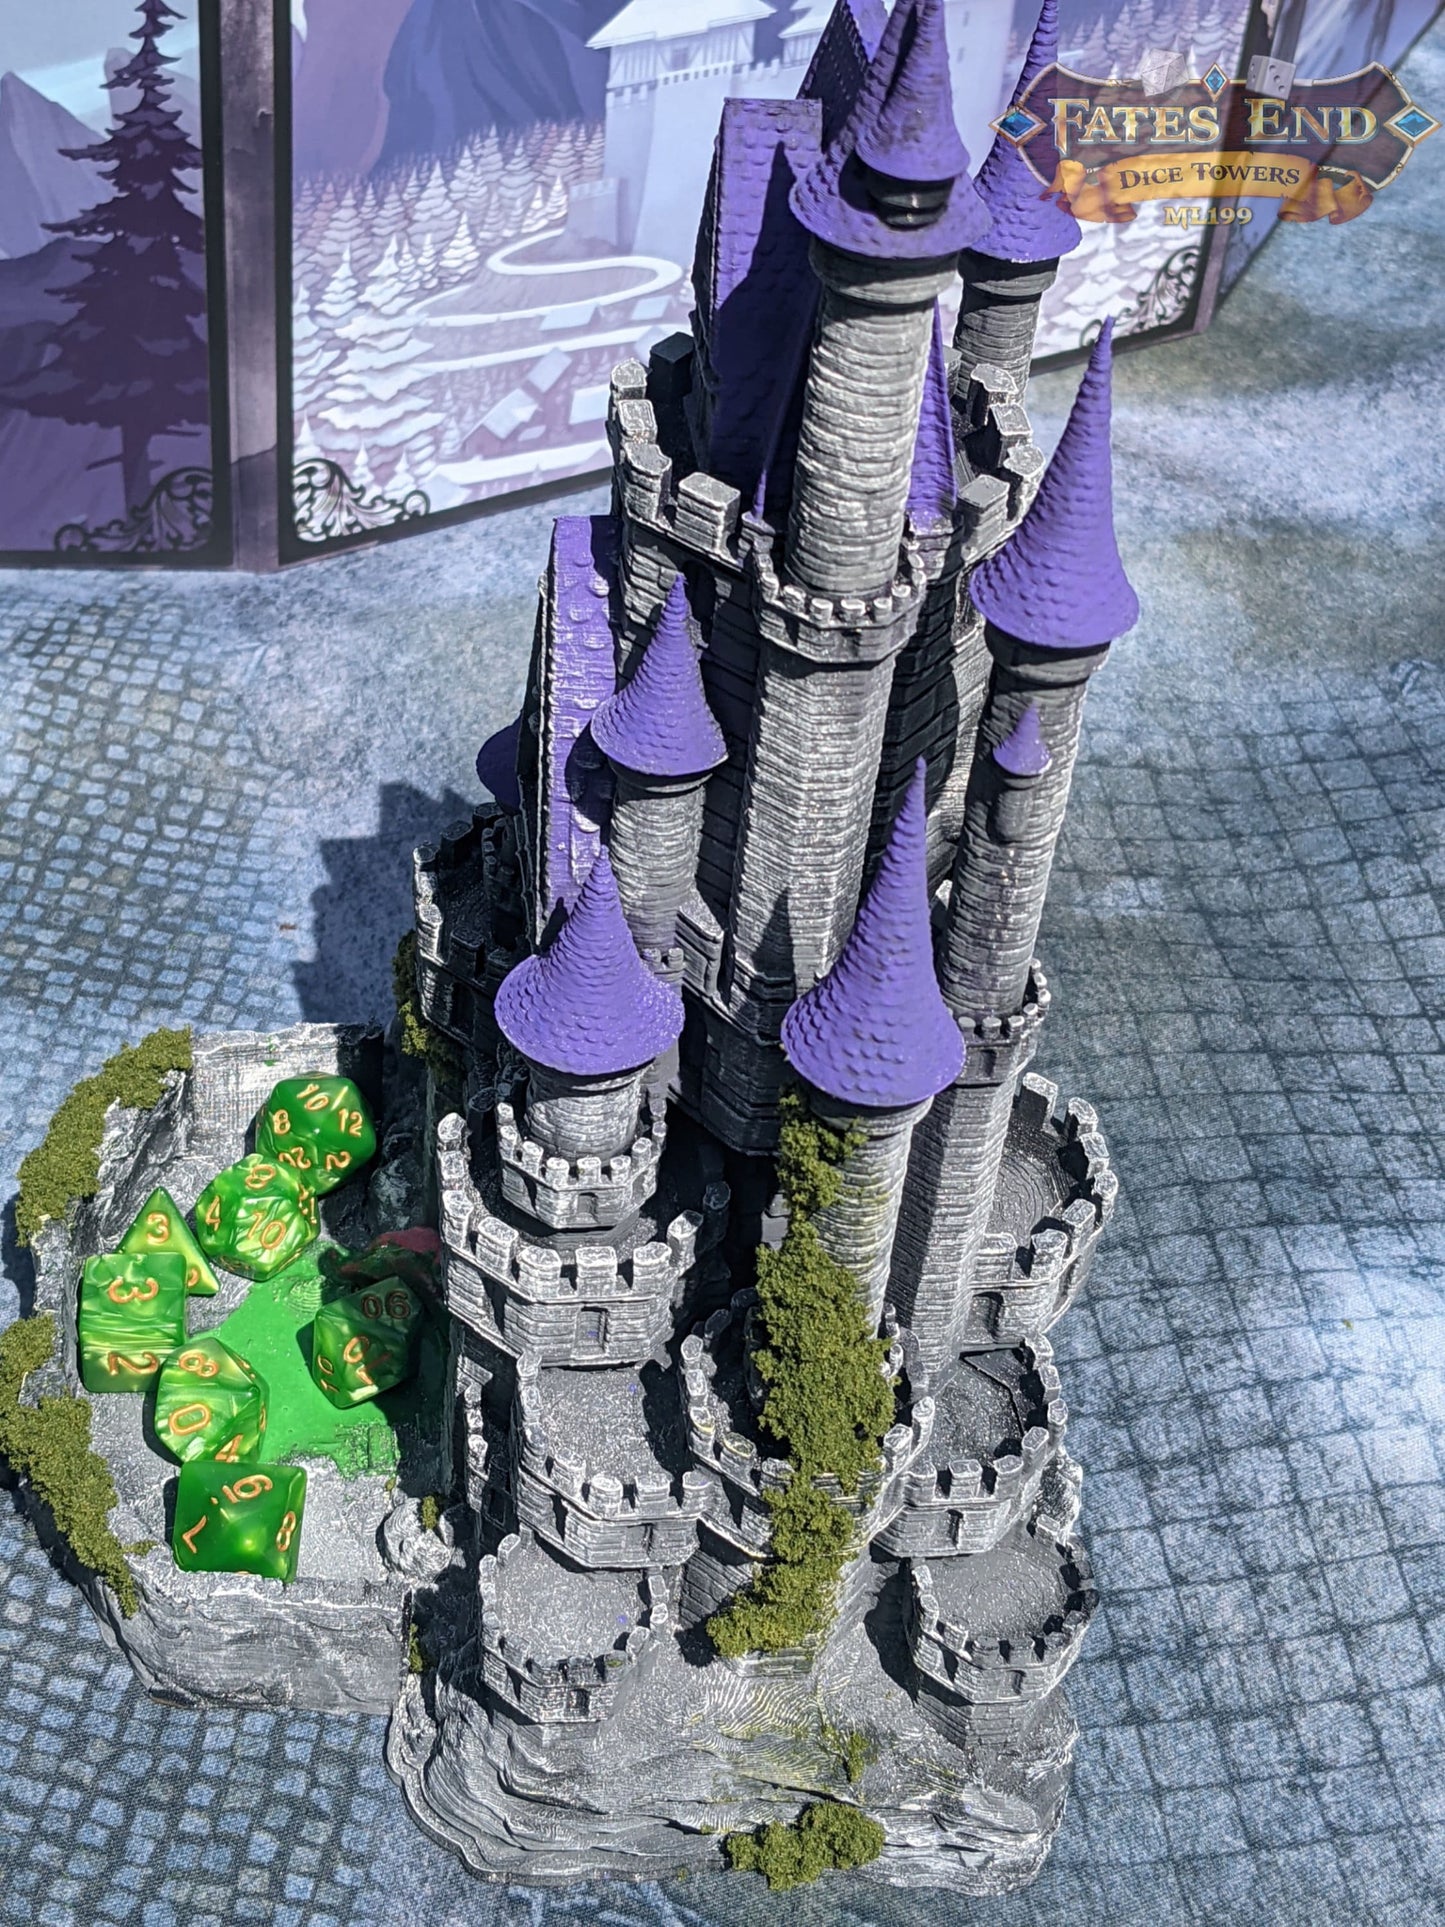 Mimic Castle 3D Printed Dice Tower-Fate's End Collection-Tabletop RPG Gaming Fantasy Cosplay - Dungeons and Dragon DnD D&D Wargaming.